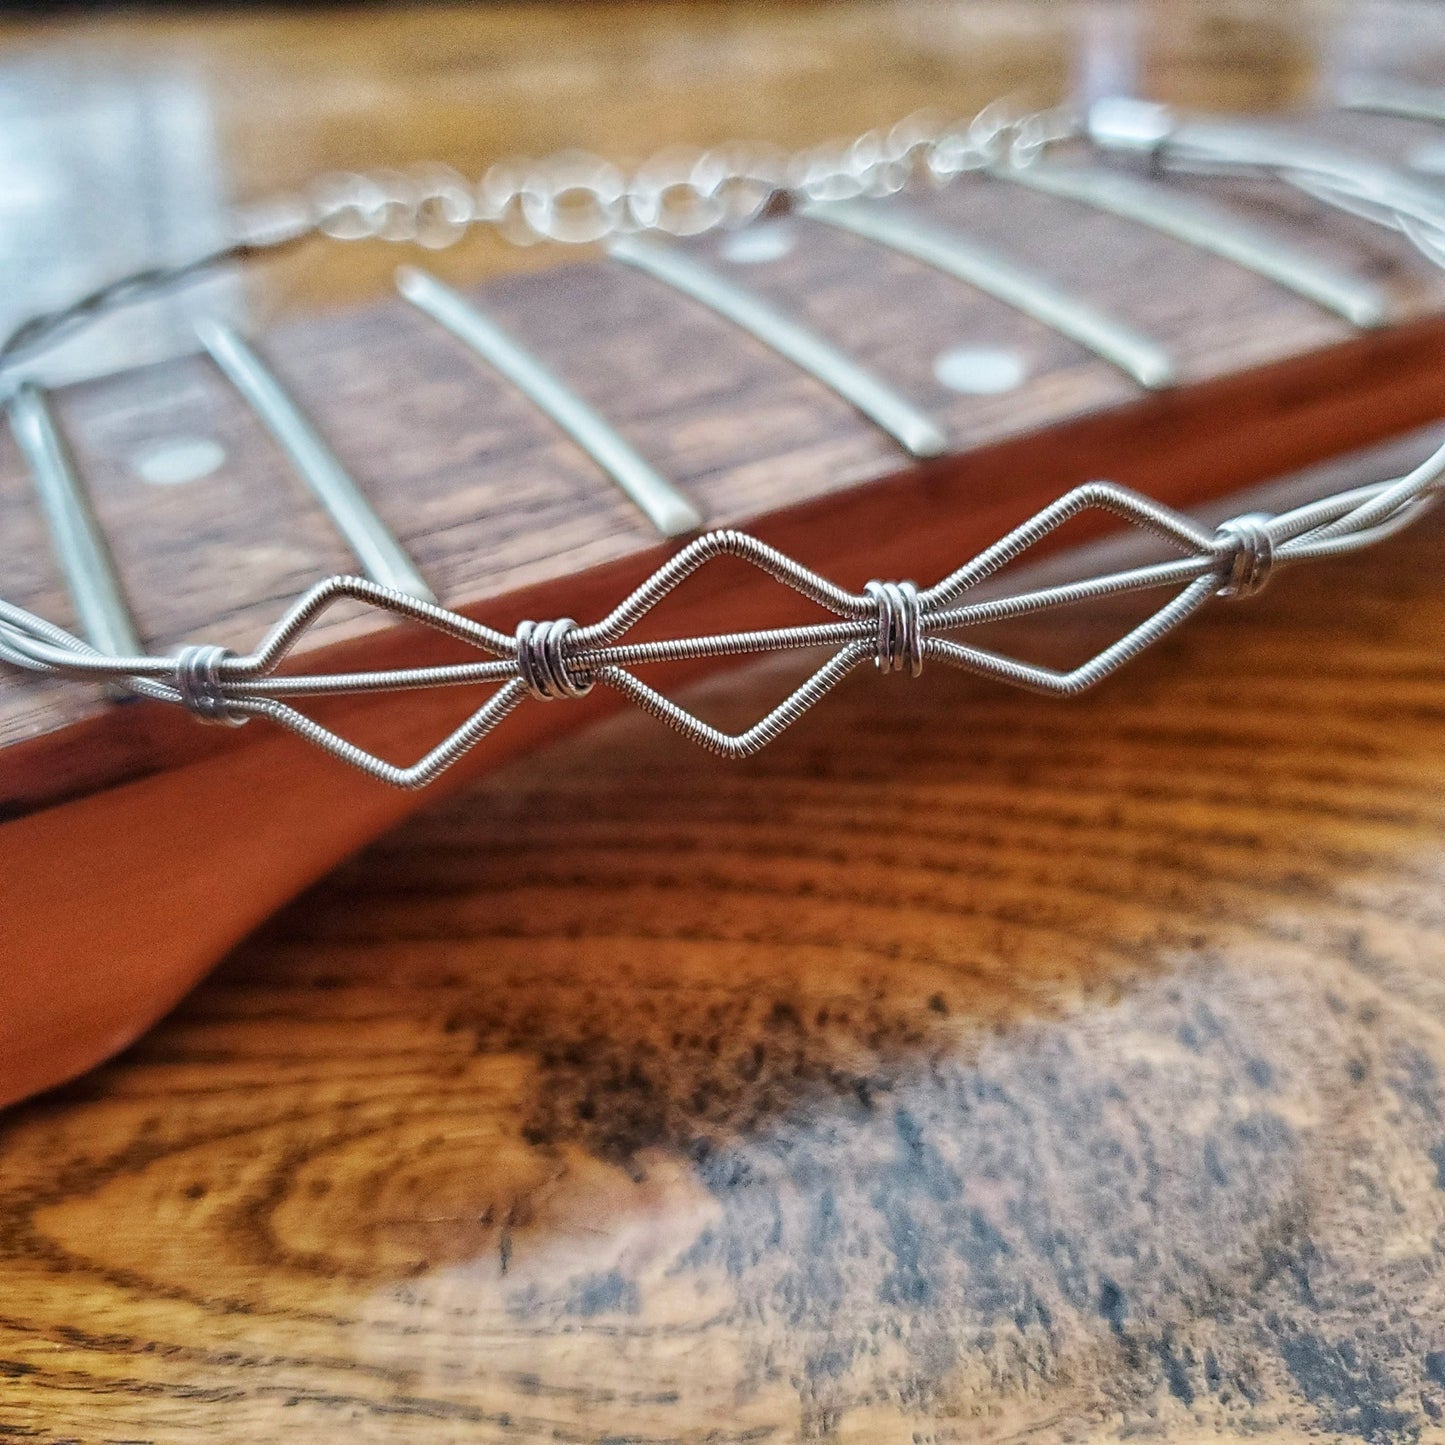  a necklace in the shape of 3 diamonds made from - sits on the neck of a guitar which has no strings